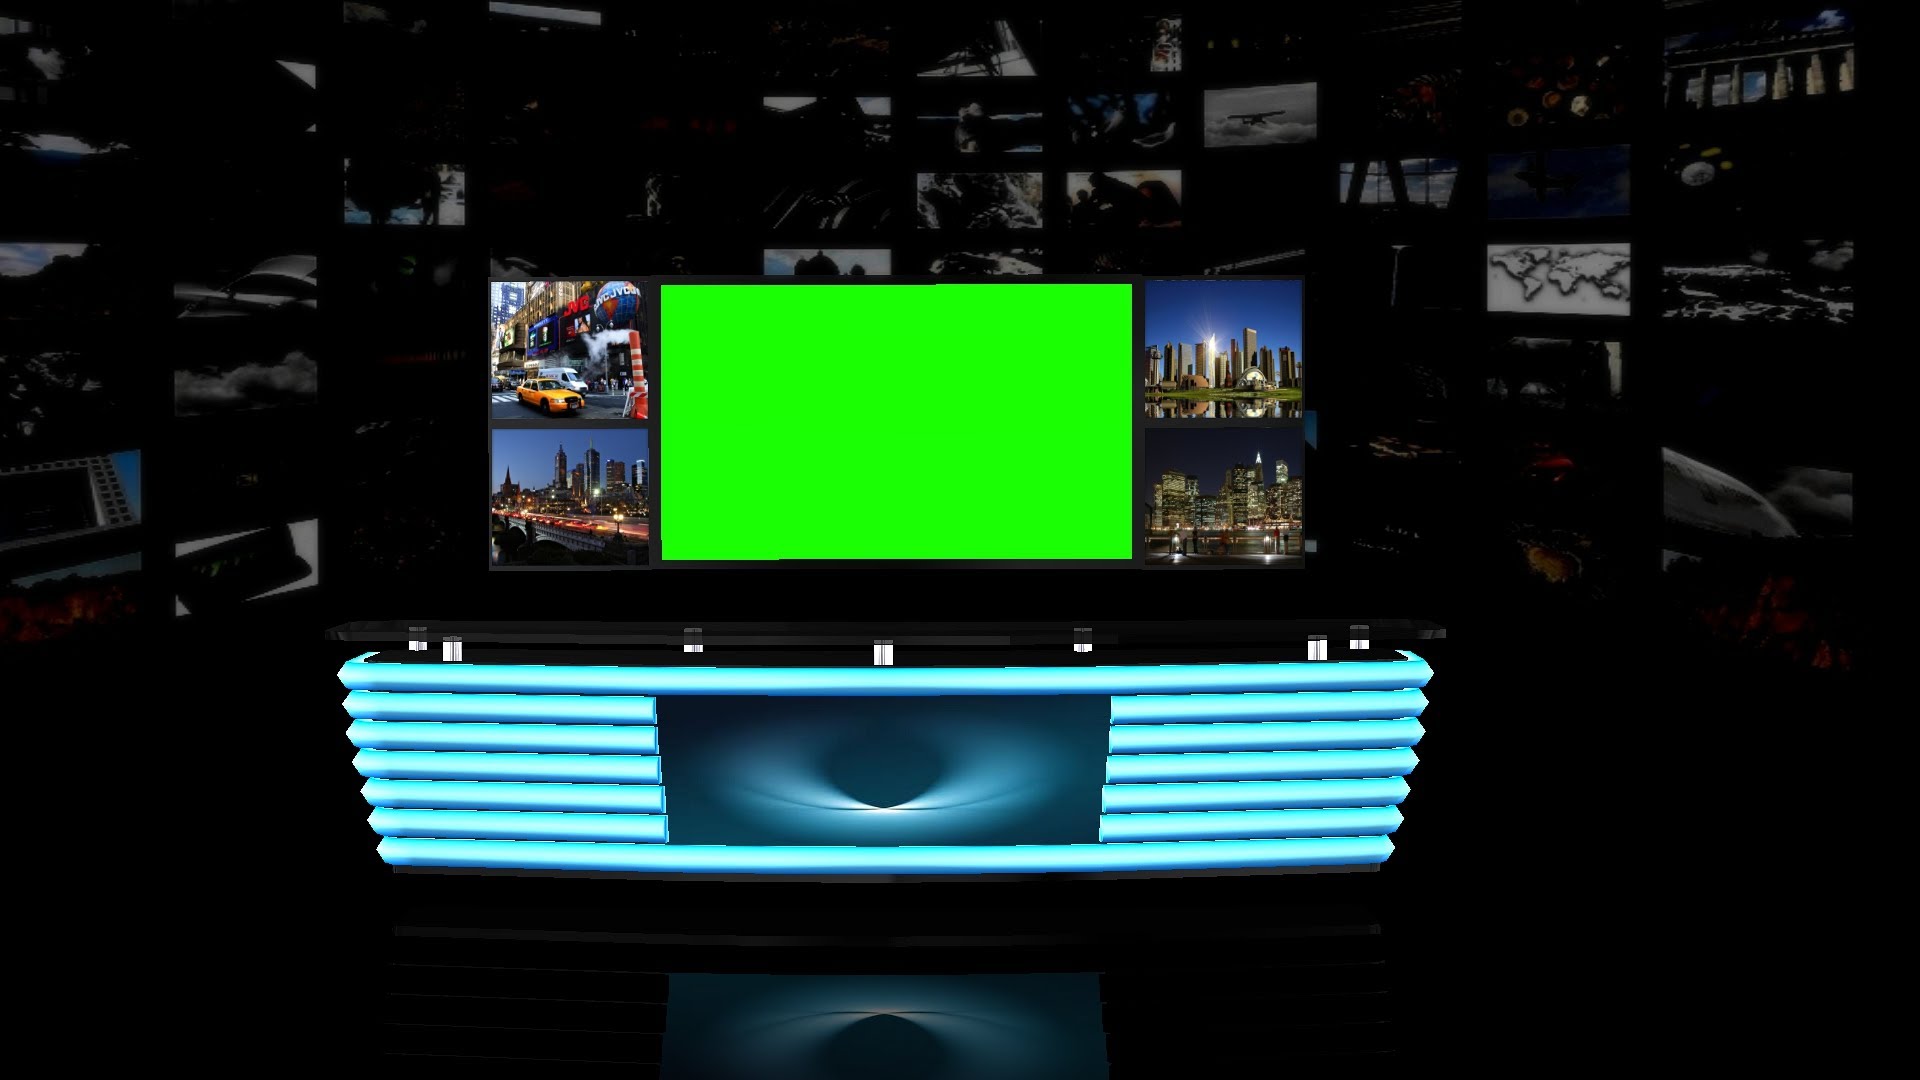 Free download Virtual TV Studio Background green screen [1920x1080] for